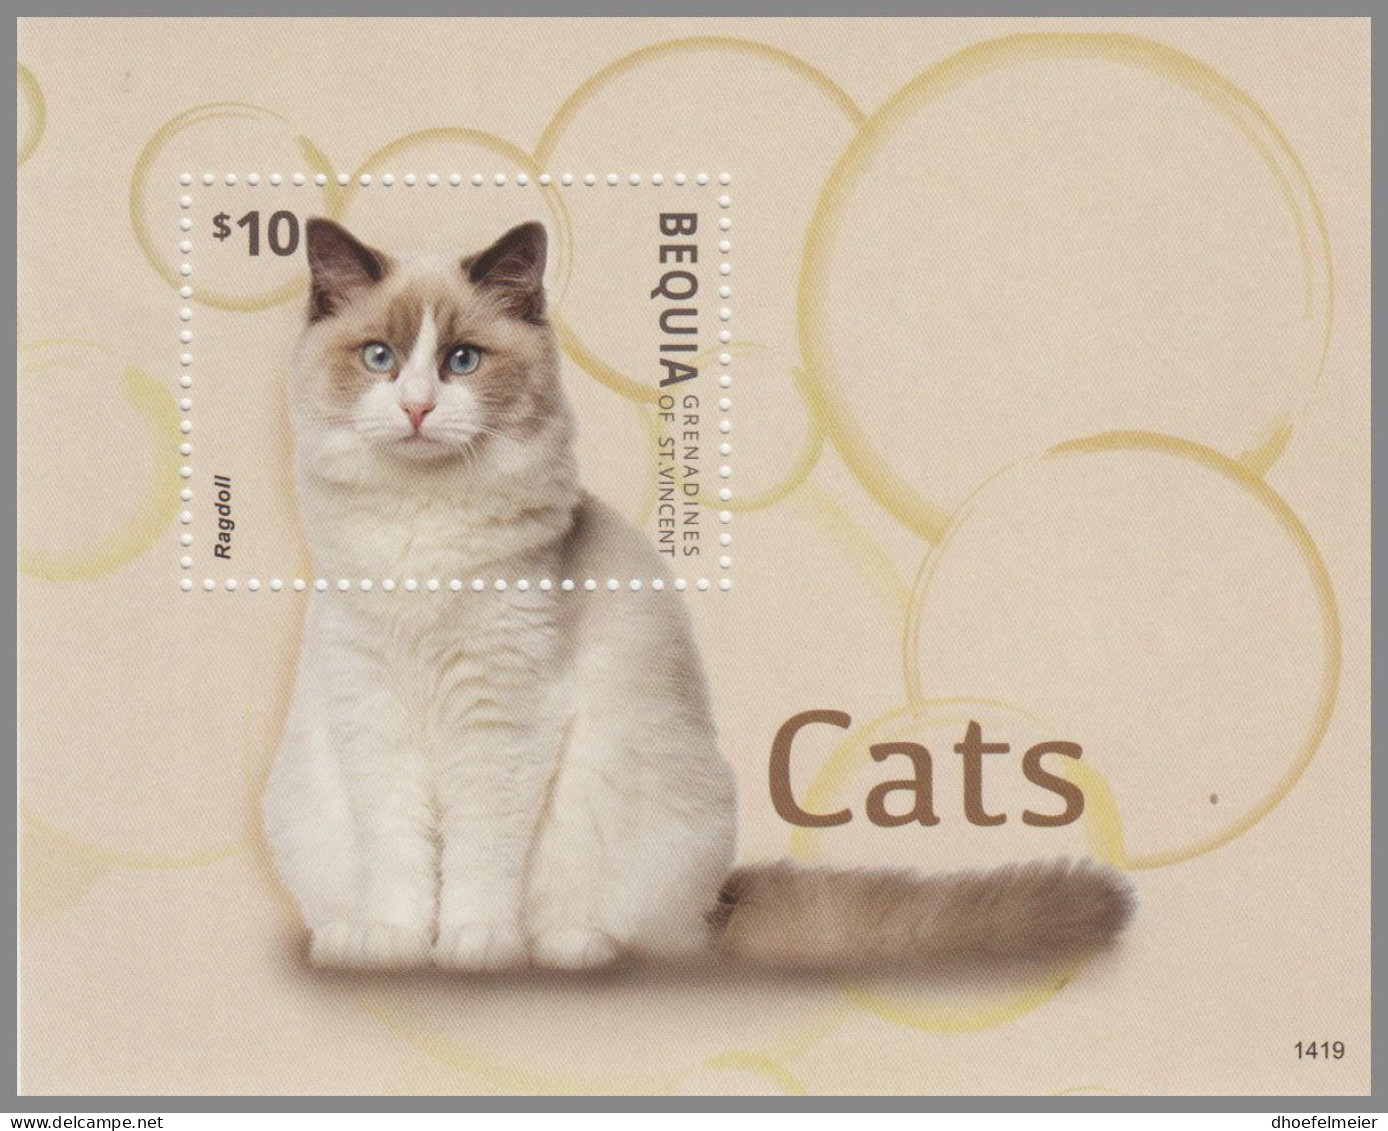 BEQUIA GRENADINES 2014 MNH Cats Katzen 1419 S/S – OFFICIAL ISSUE – DHQ49610 - Domestic Cats